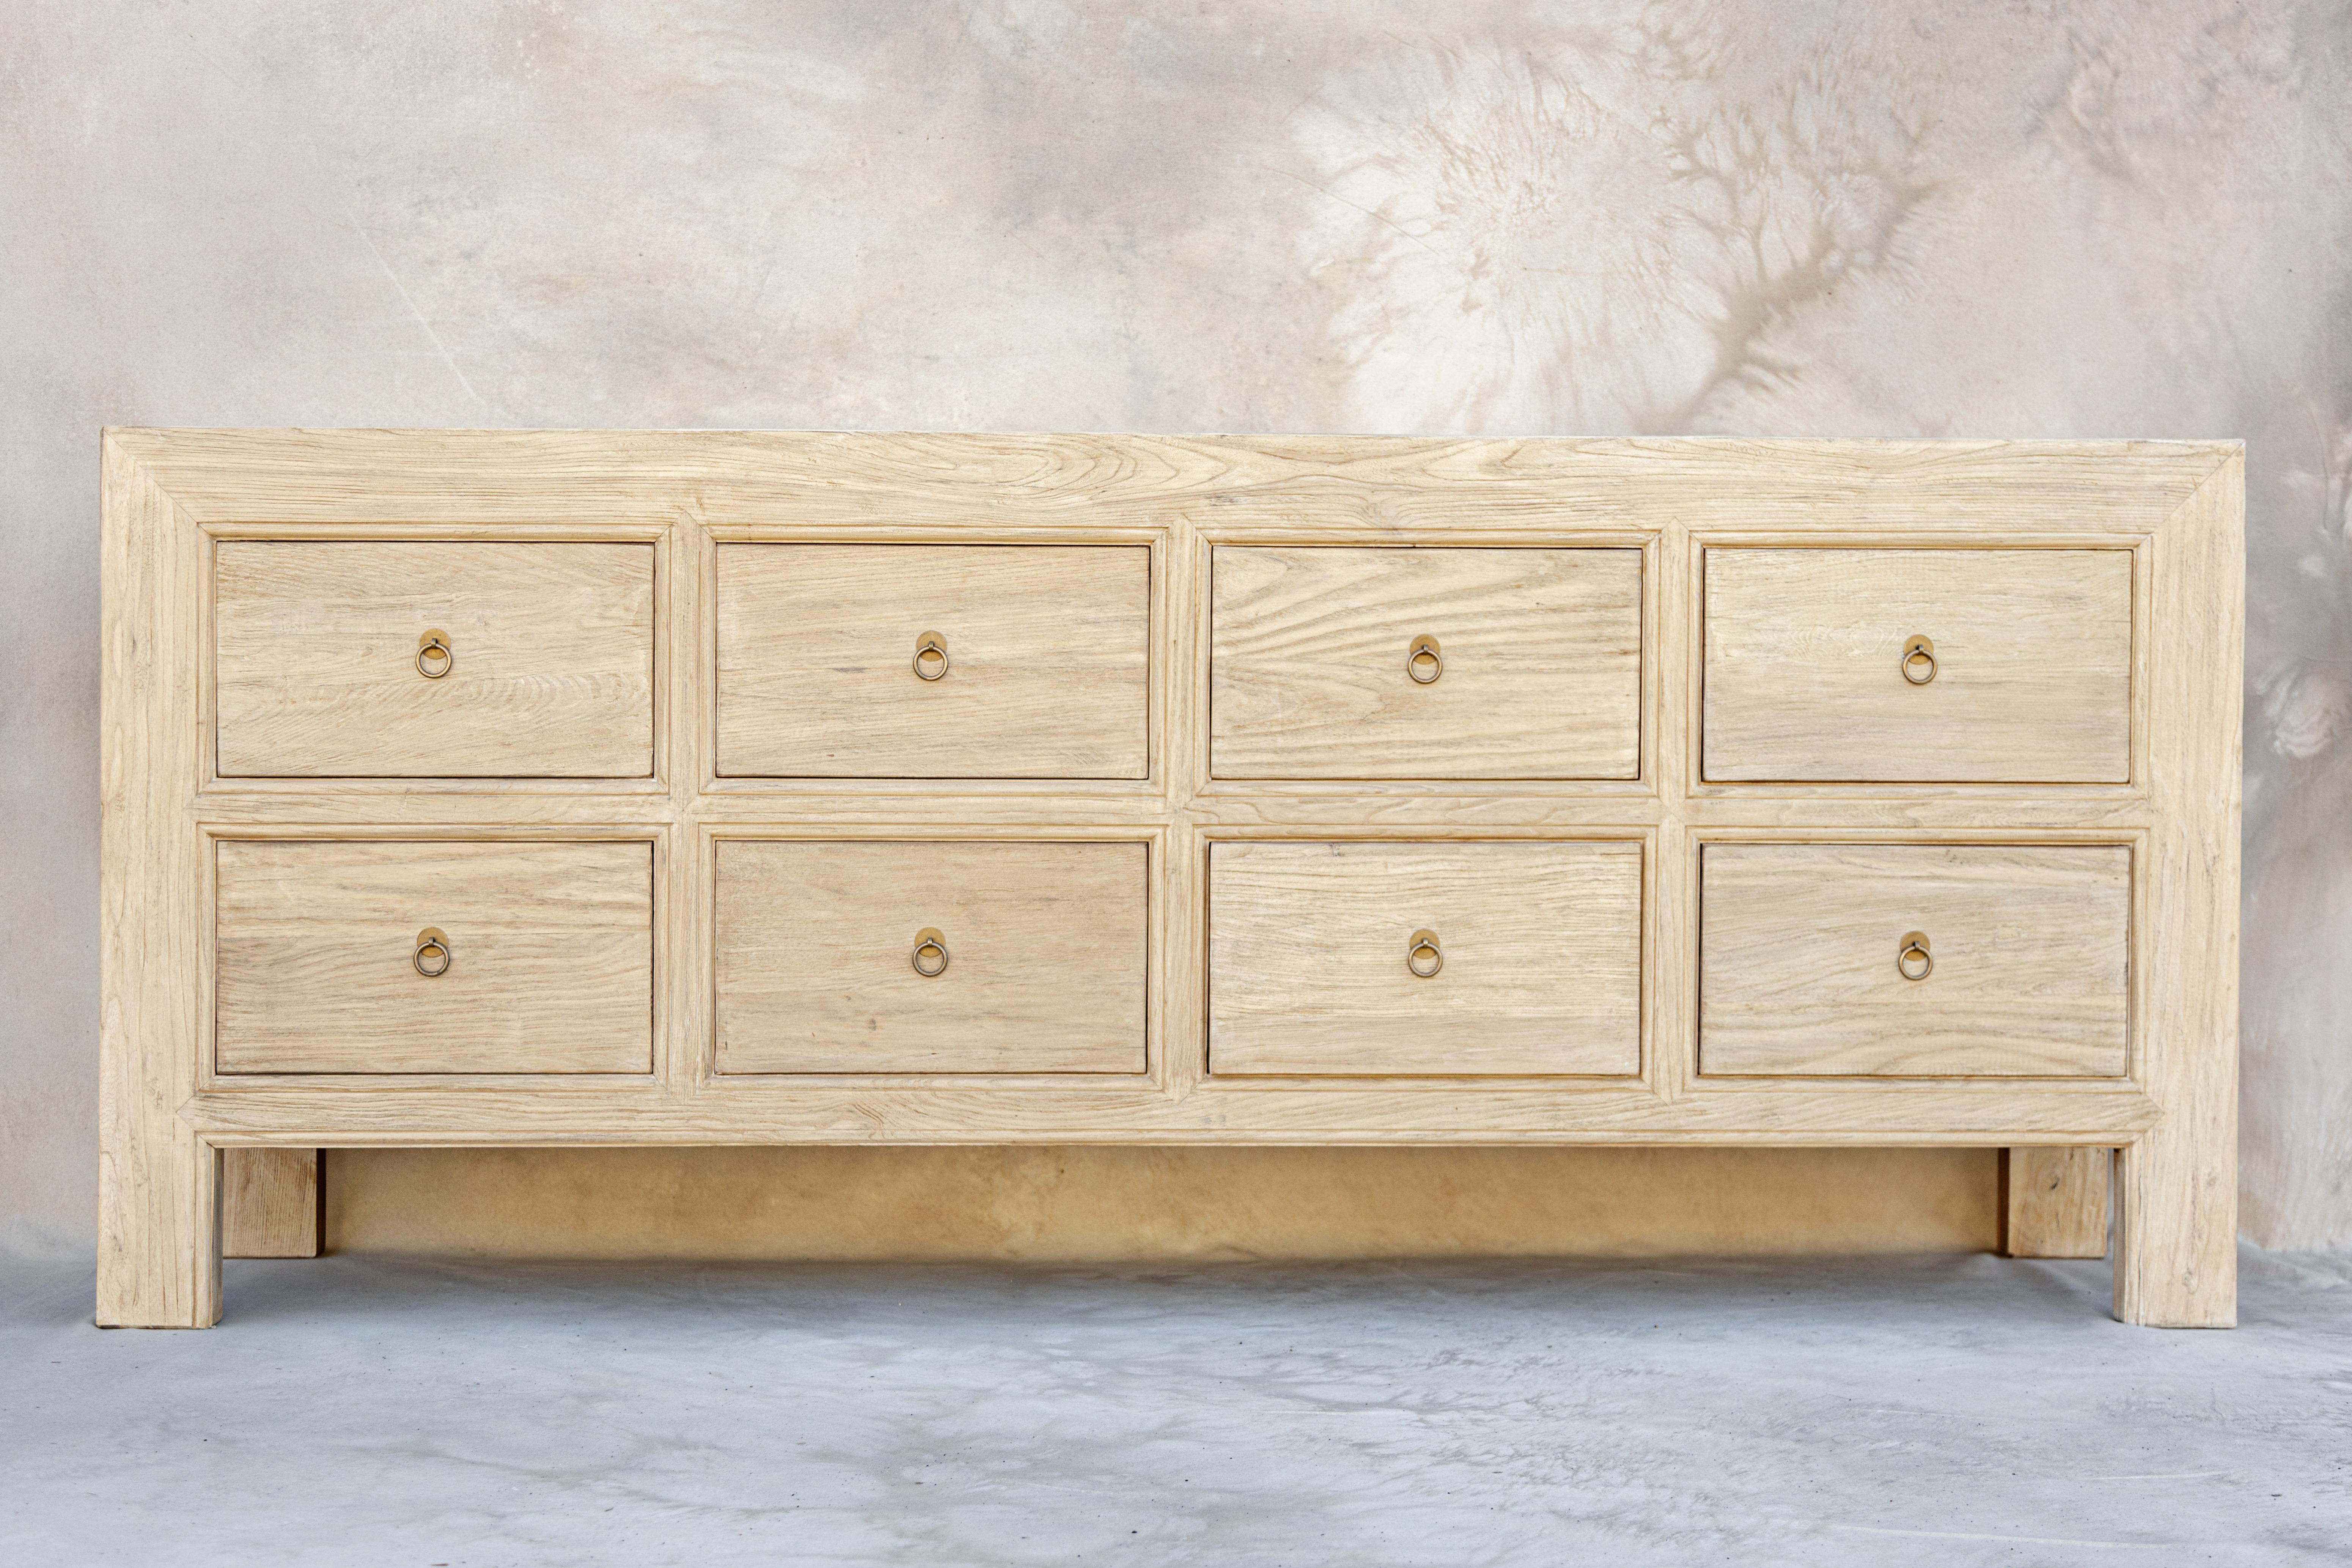 Introducing our Abbott 8 drawer dresser. Crafted from vintage elm wood sourced throughout Europe and Asia. We love the natural wood tone and beautiful textures of this piece. Use as a dresser or even a sideboard. Each piece is one of a kind. No two